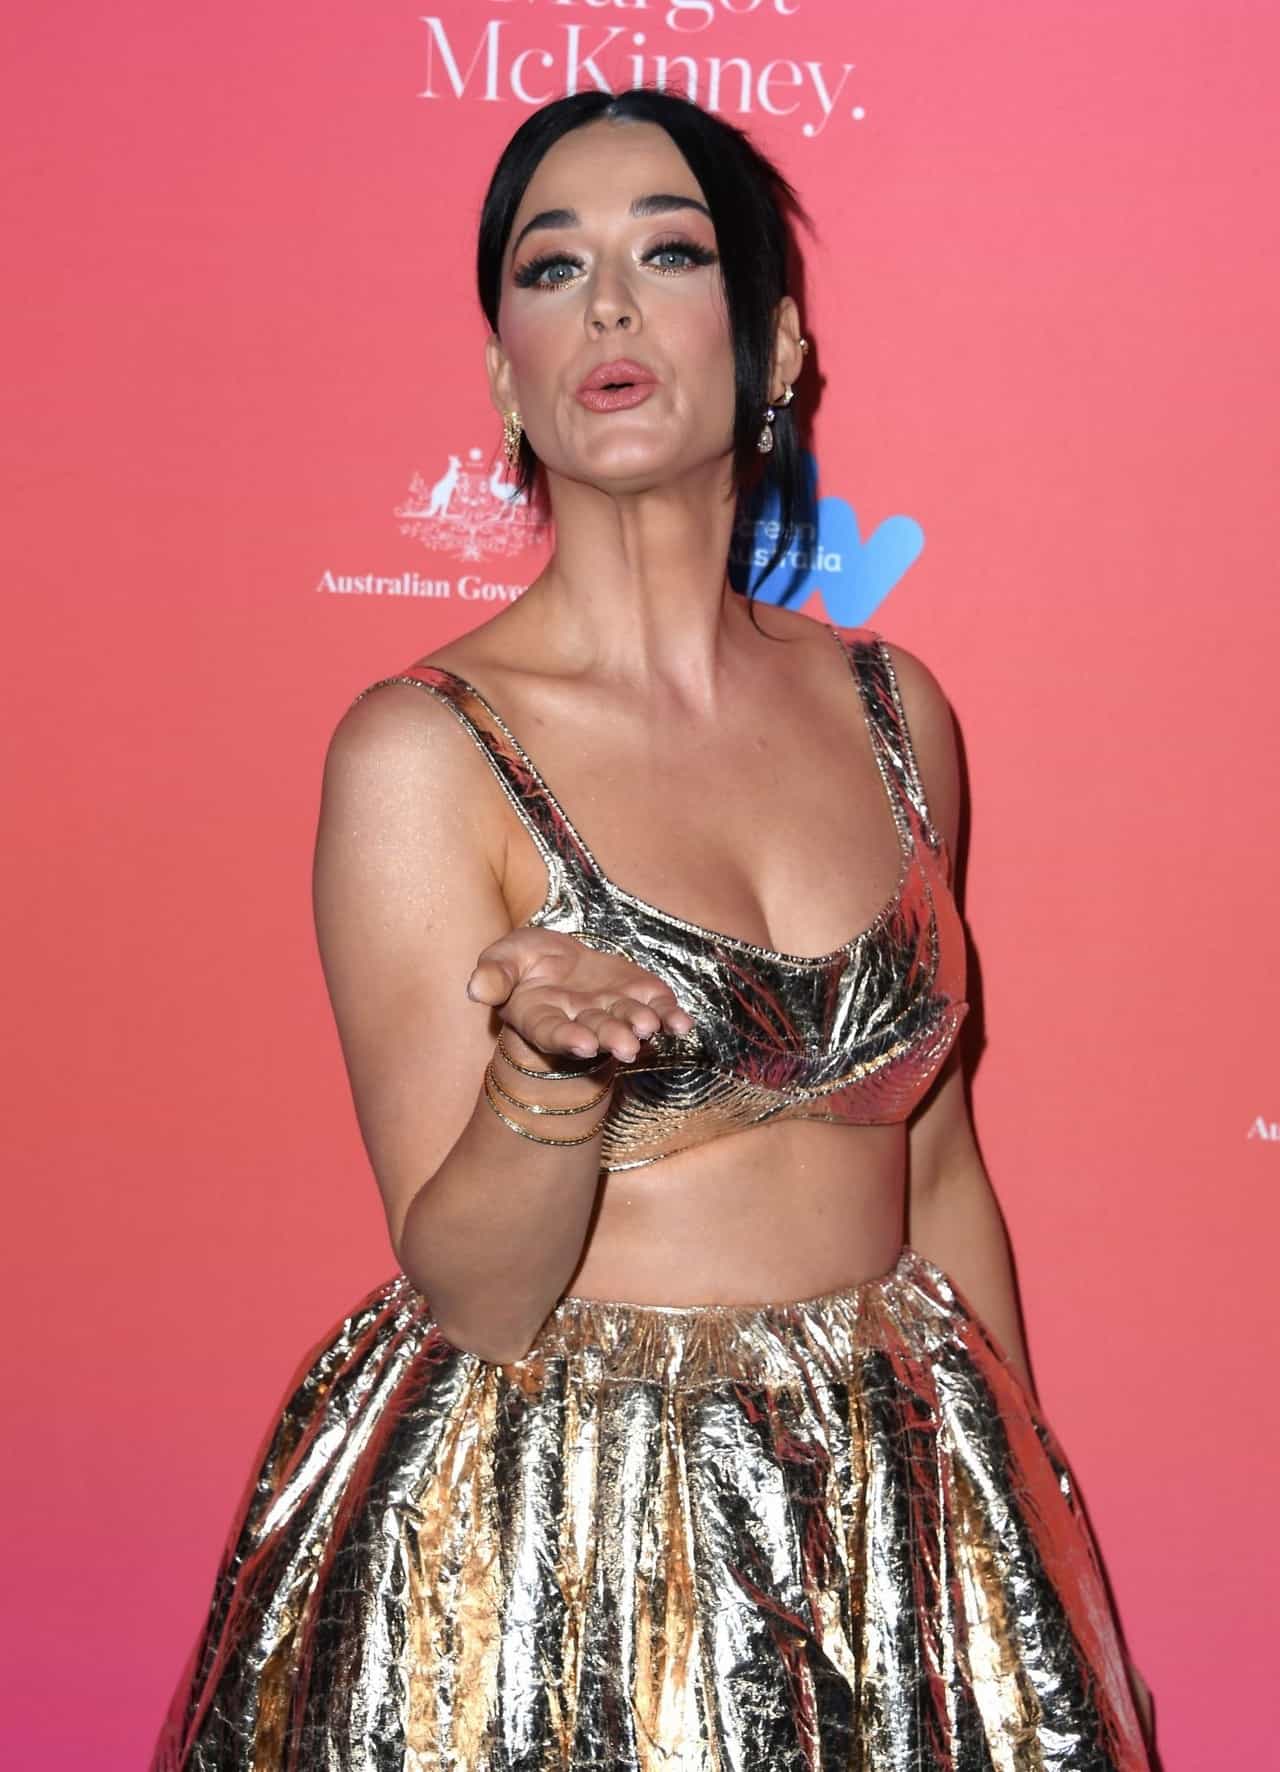 Katy Perry Dazzles in Zimmermann Crop Top and Skirt at G'Day USA Arts Gala